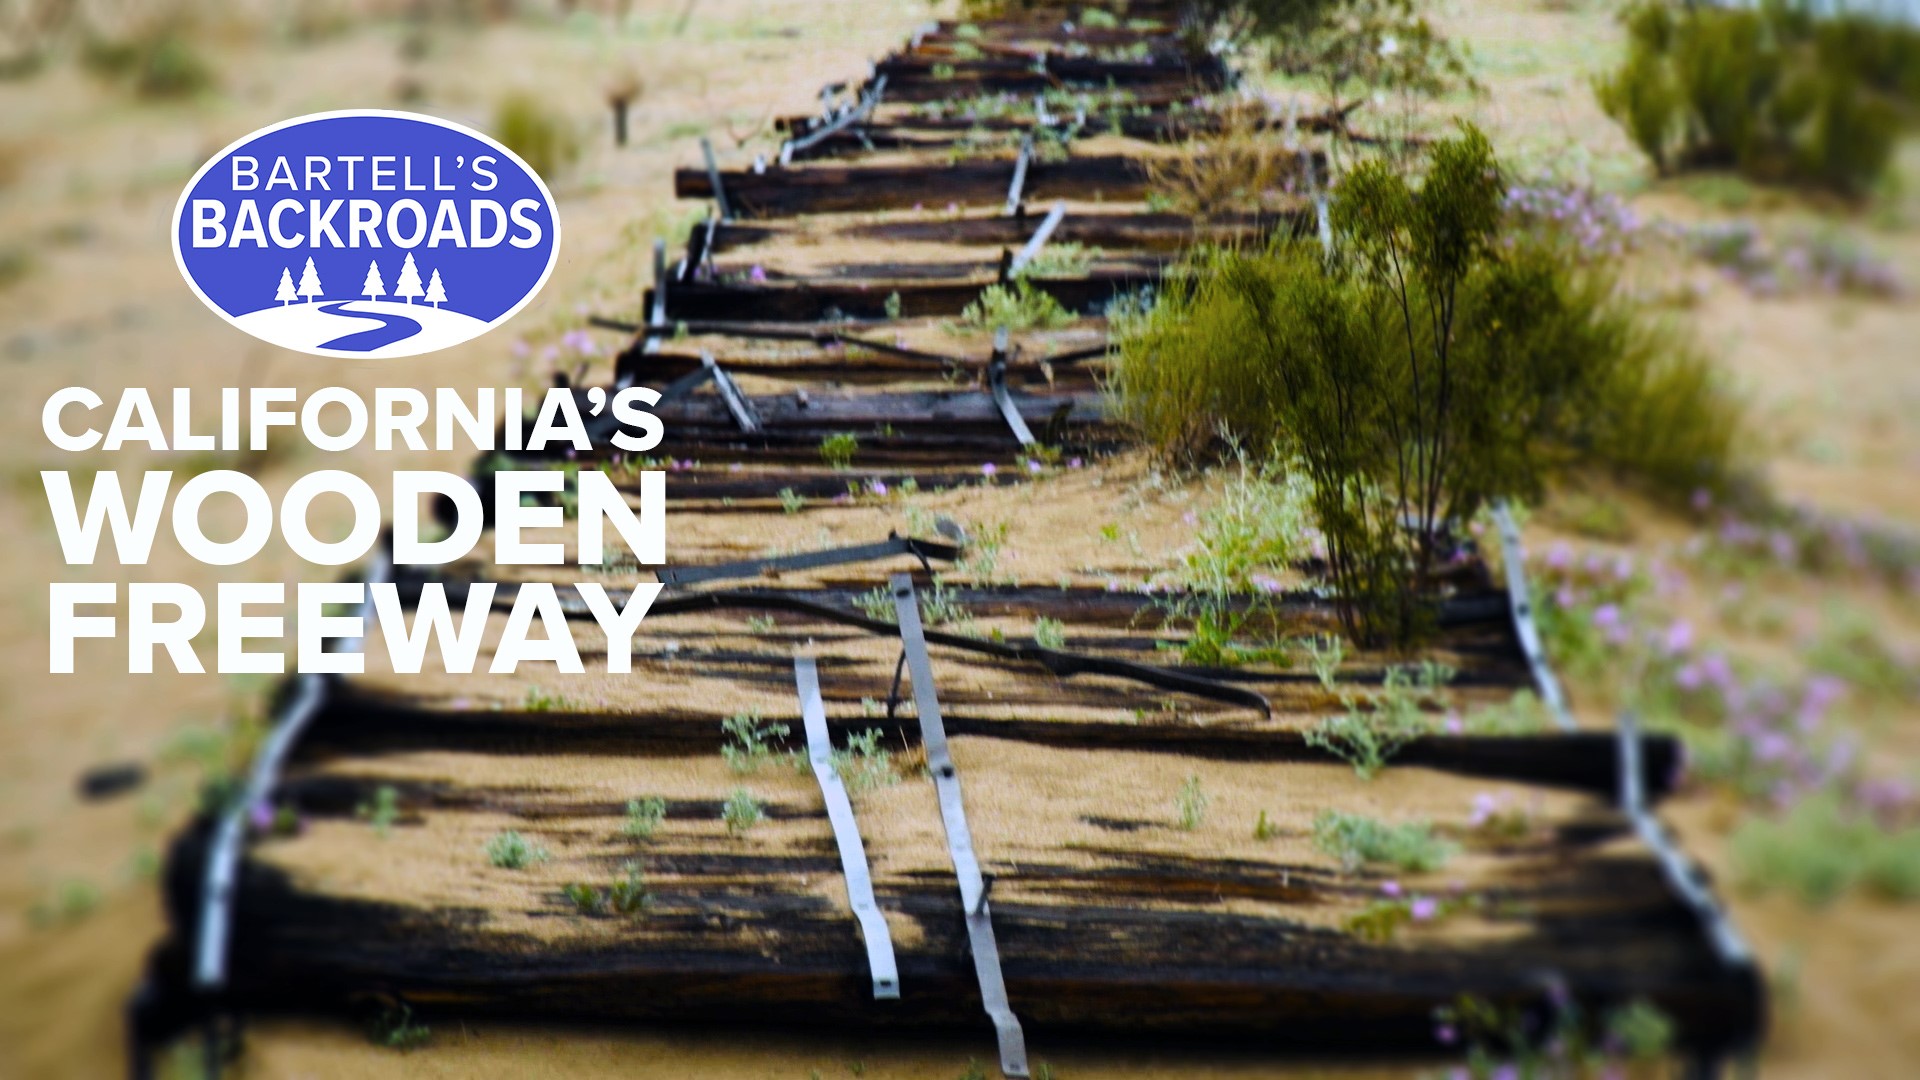 When California couldn't pave the desert, they built a movable road out of wood instead. Recorded pre-coronavirus.